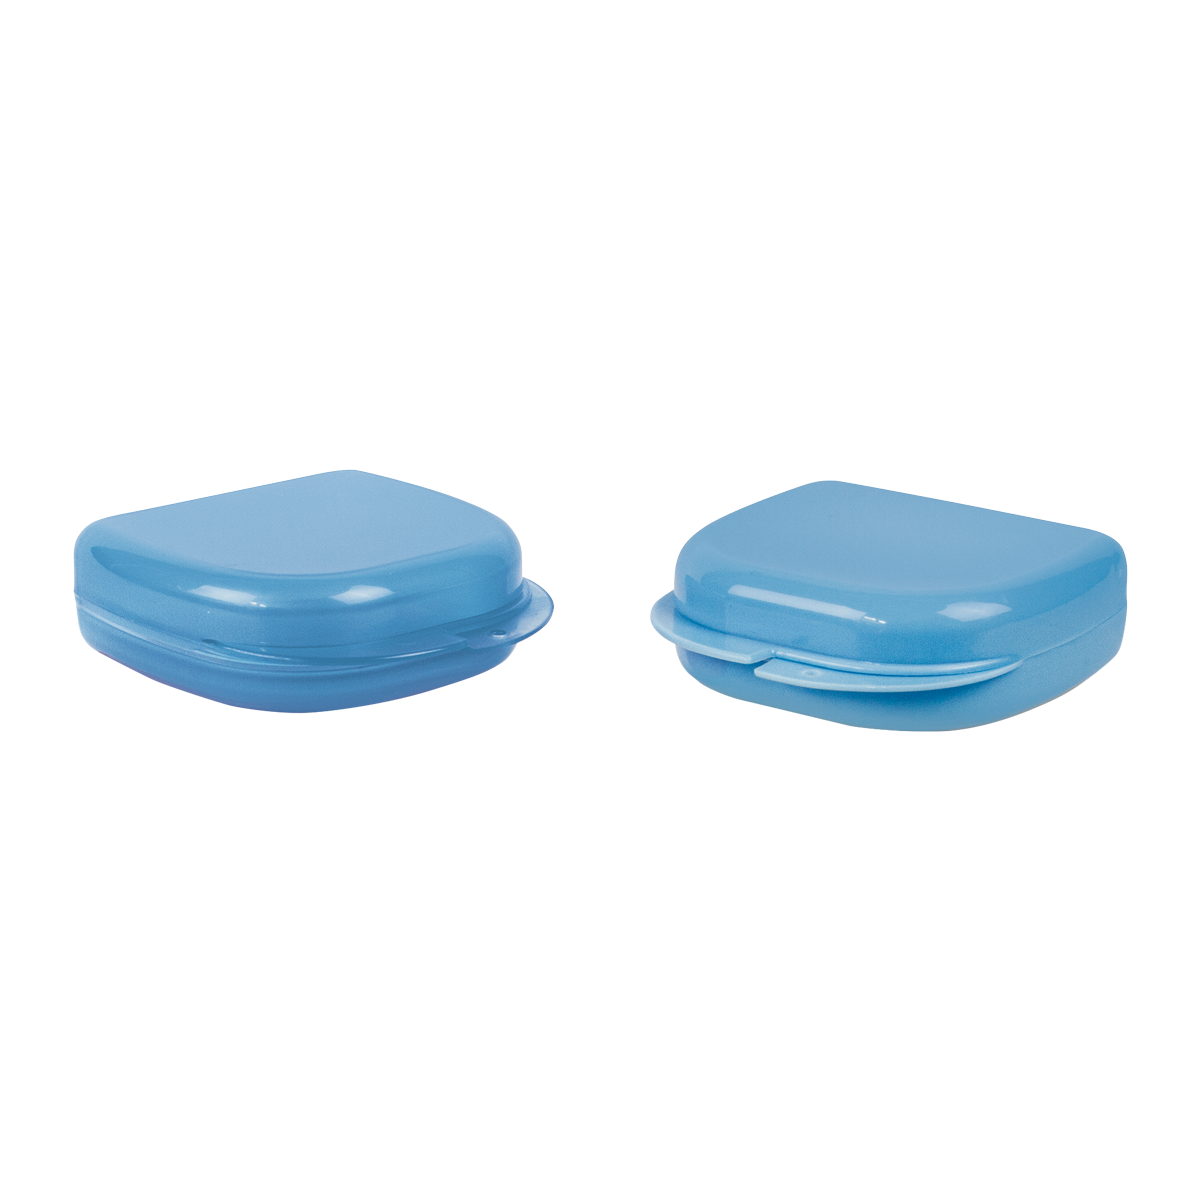 1 Retainer Boxes - American Dental Accessories, Inc.